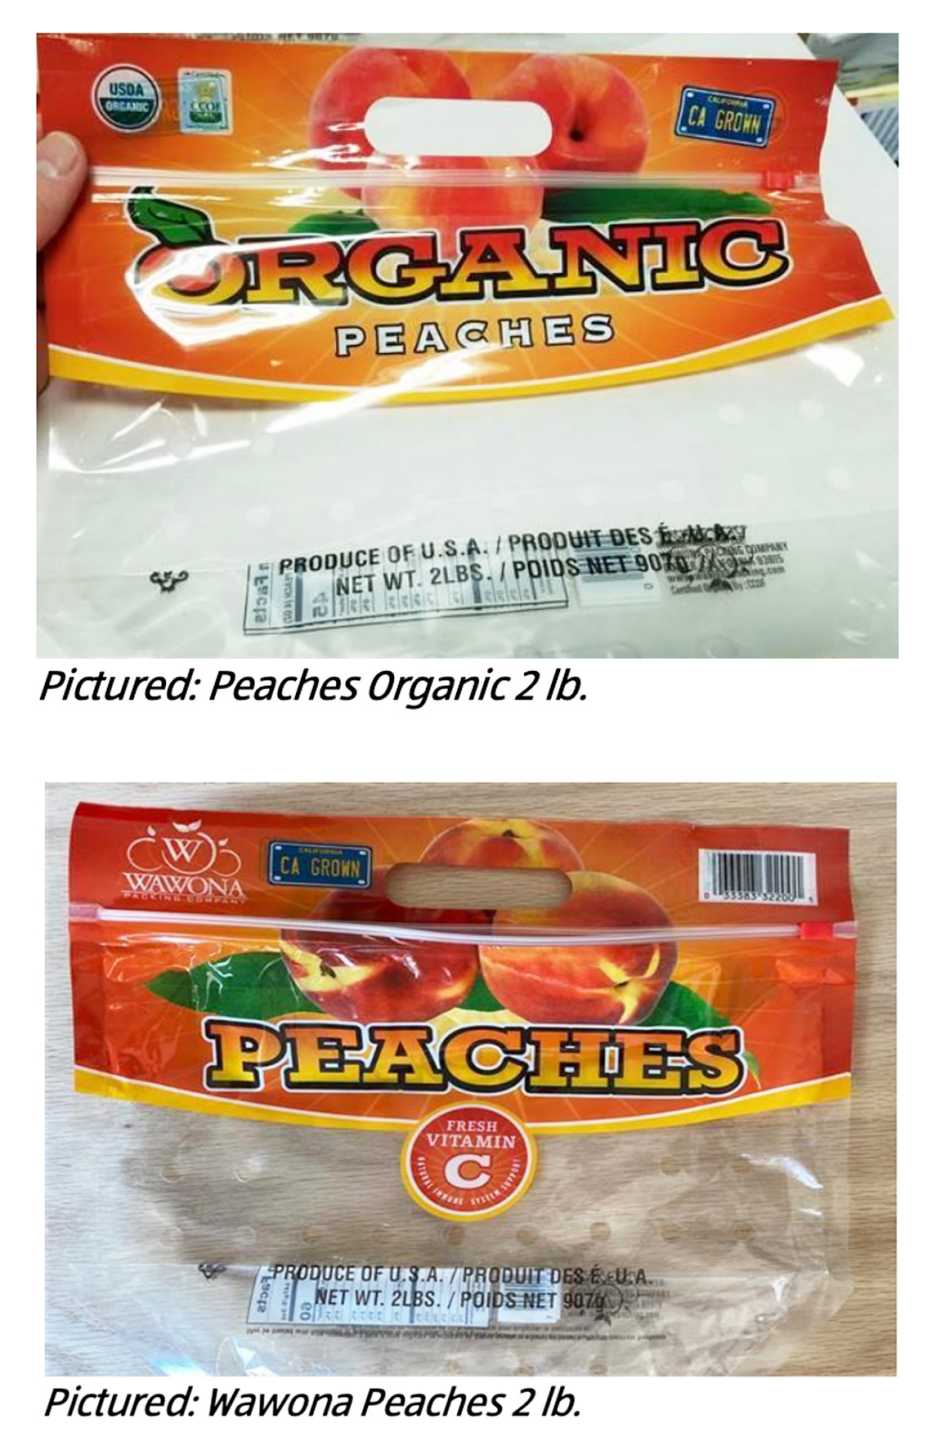 Empty bag that held peaches potentially contaminated by salmonella.